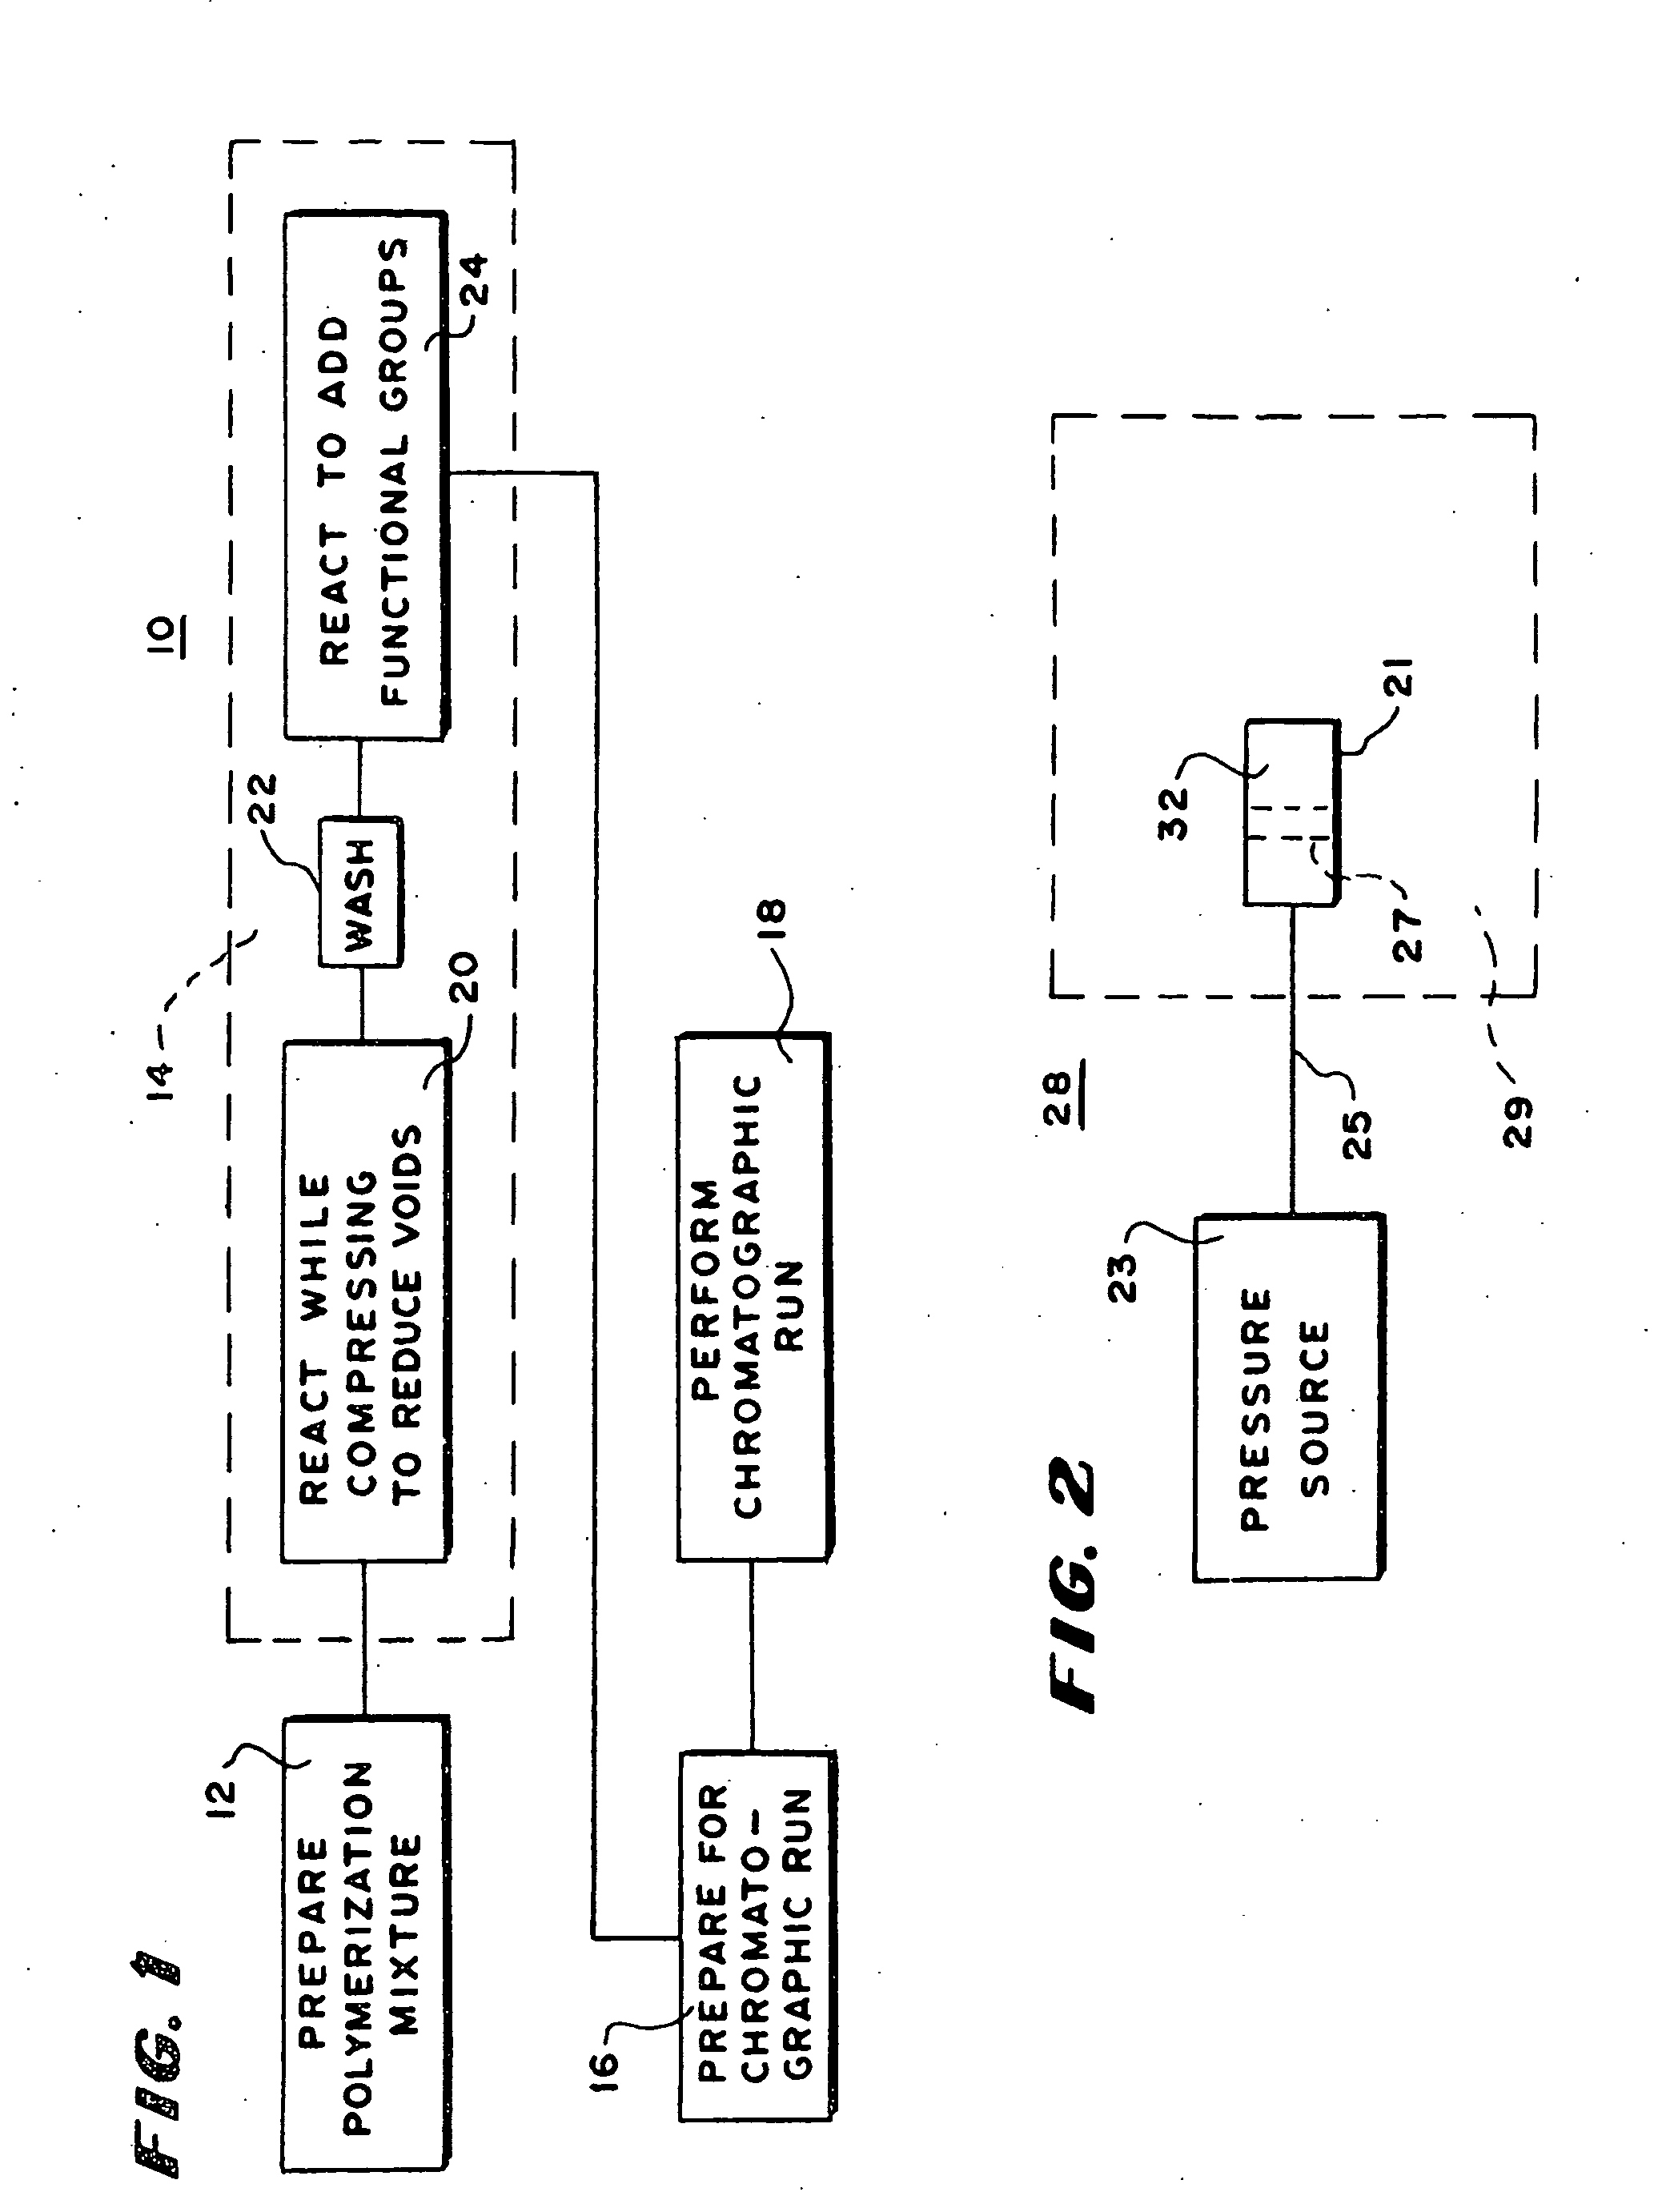 Separation system, components of a separation system and methods of making and using them